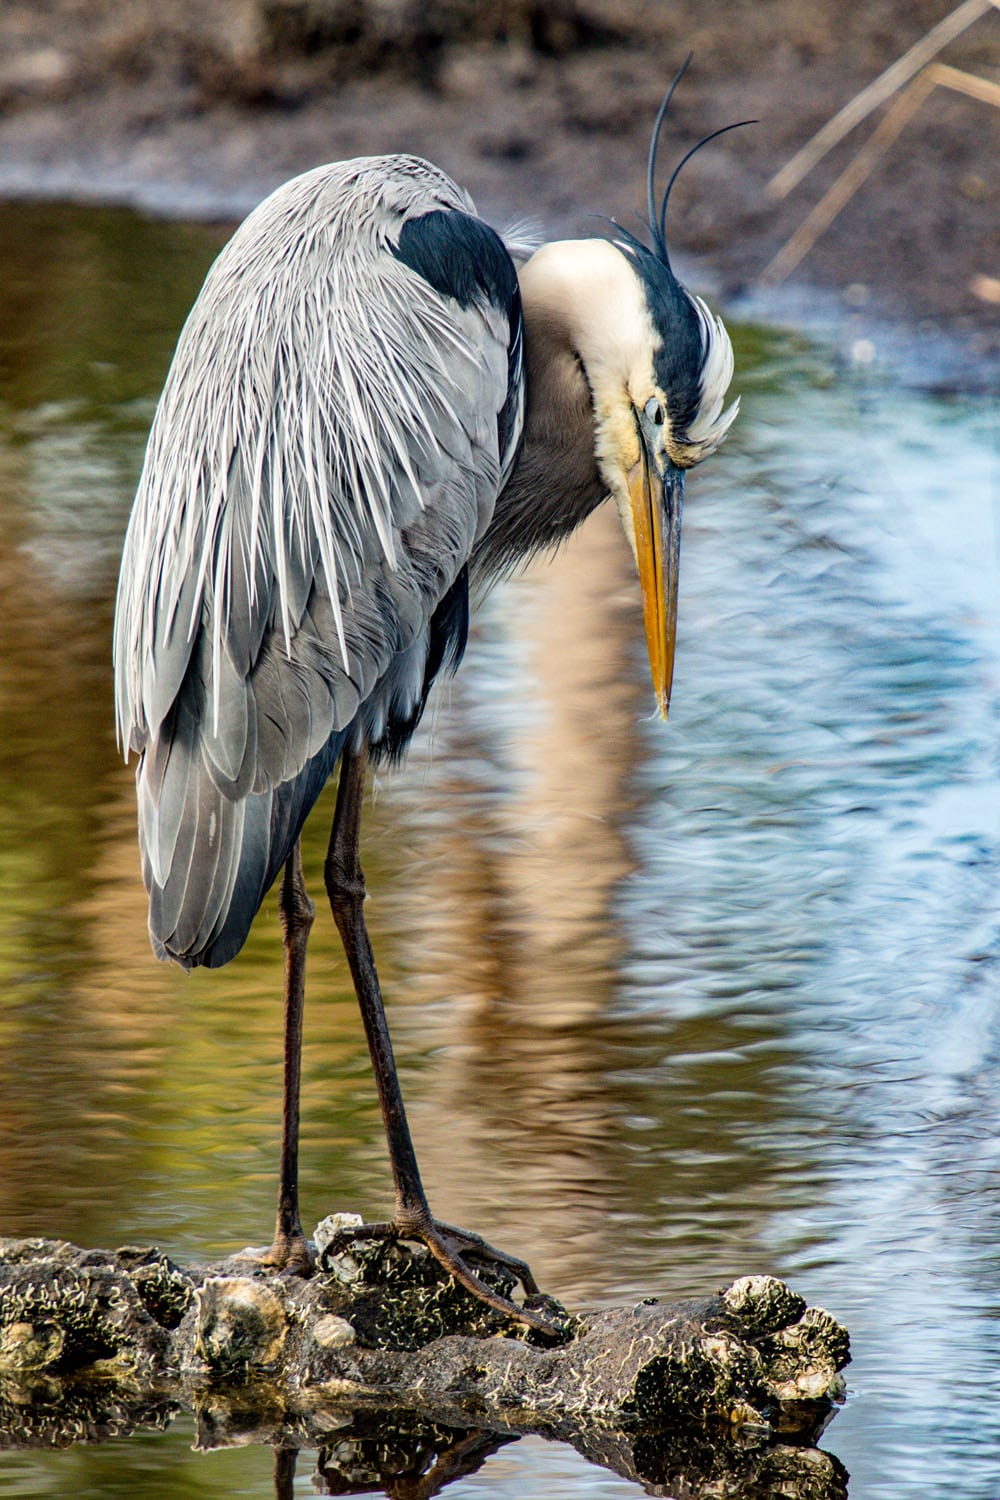 Bay the Great Blue Heron.... rests on the limestone rocks in the marsh inlet on Bayou Drive. This Great Blue Heron has fishing line constricted around its tongue and lower bill causing the heron not to hunt or eat correctly.